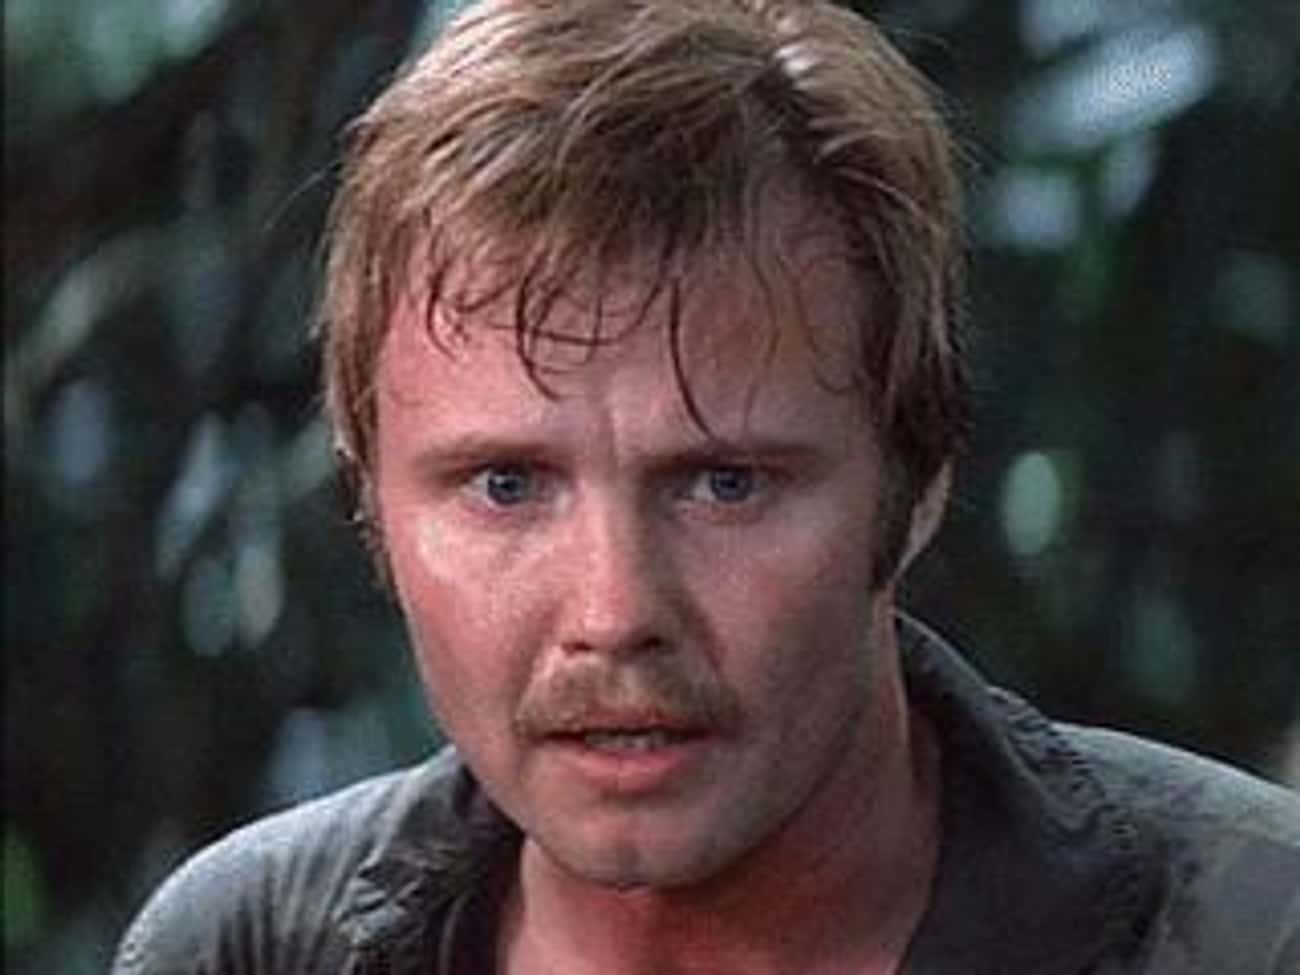 Young Jon Voight in Military Uniform